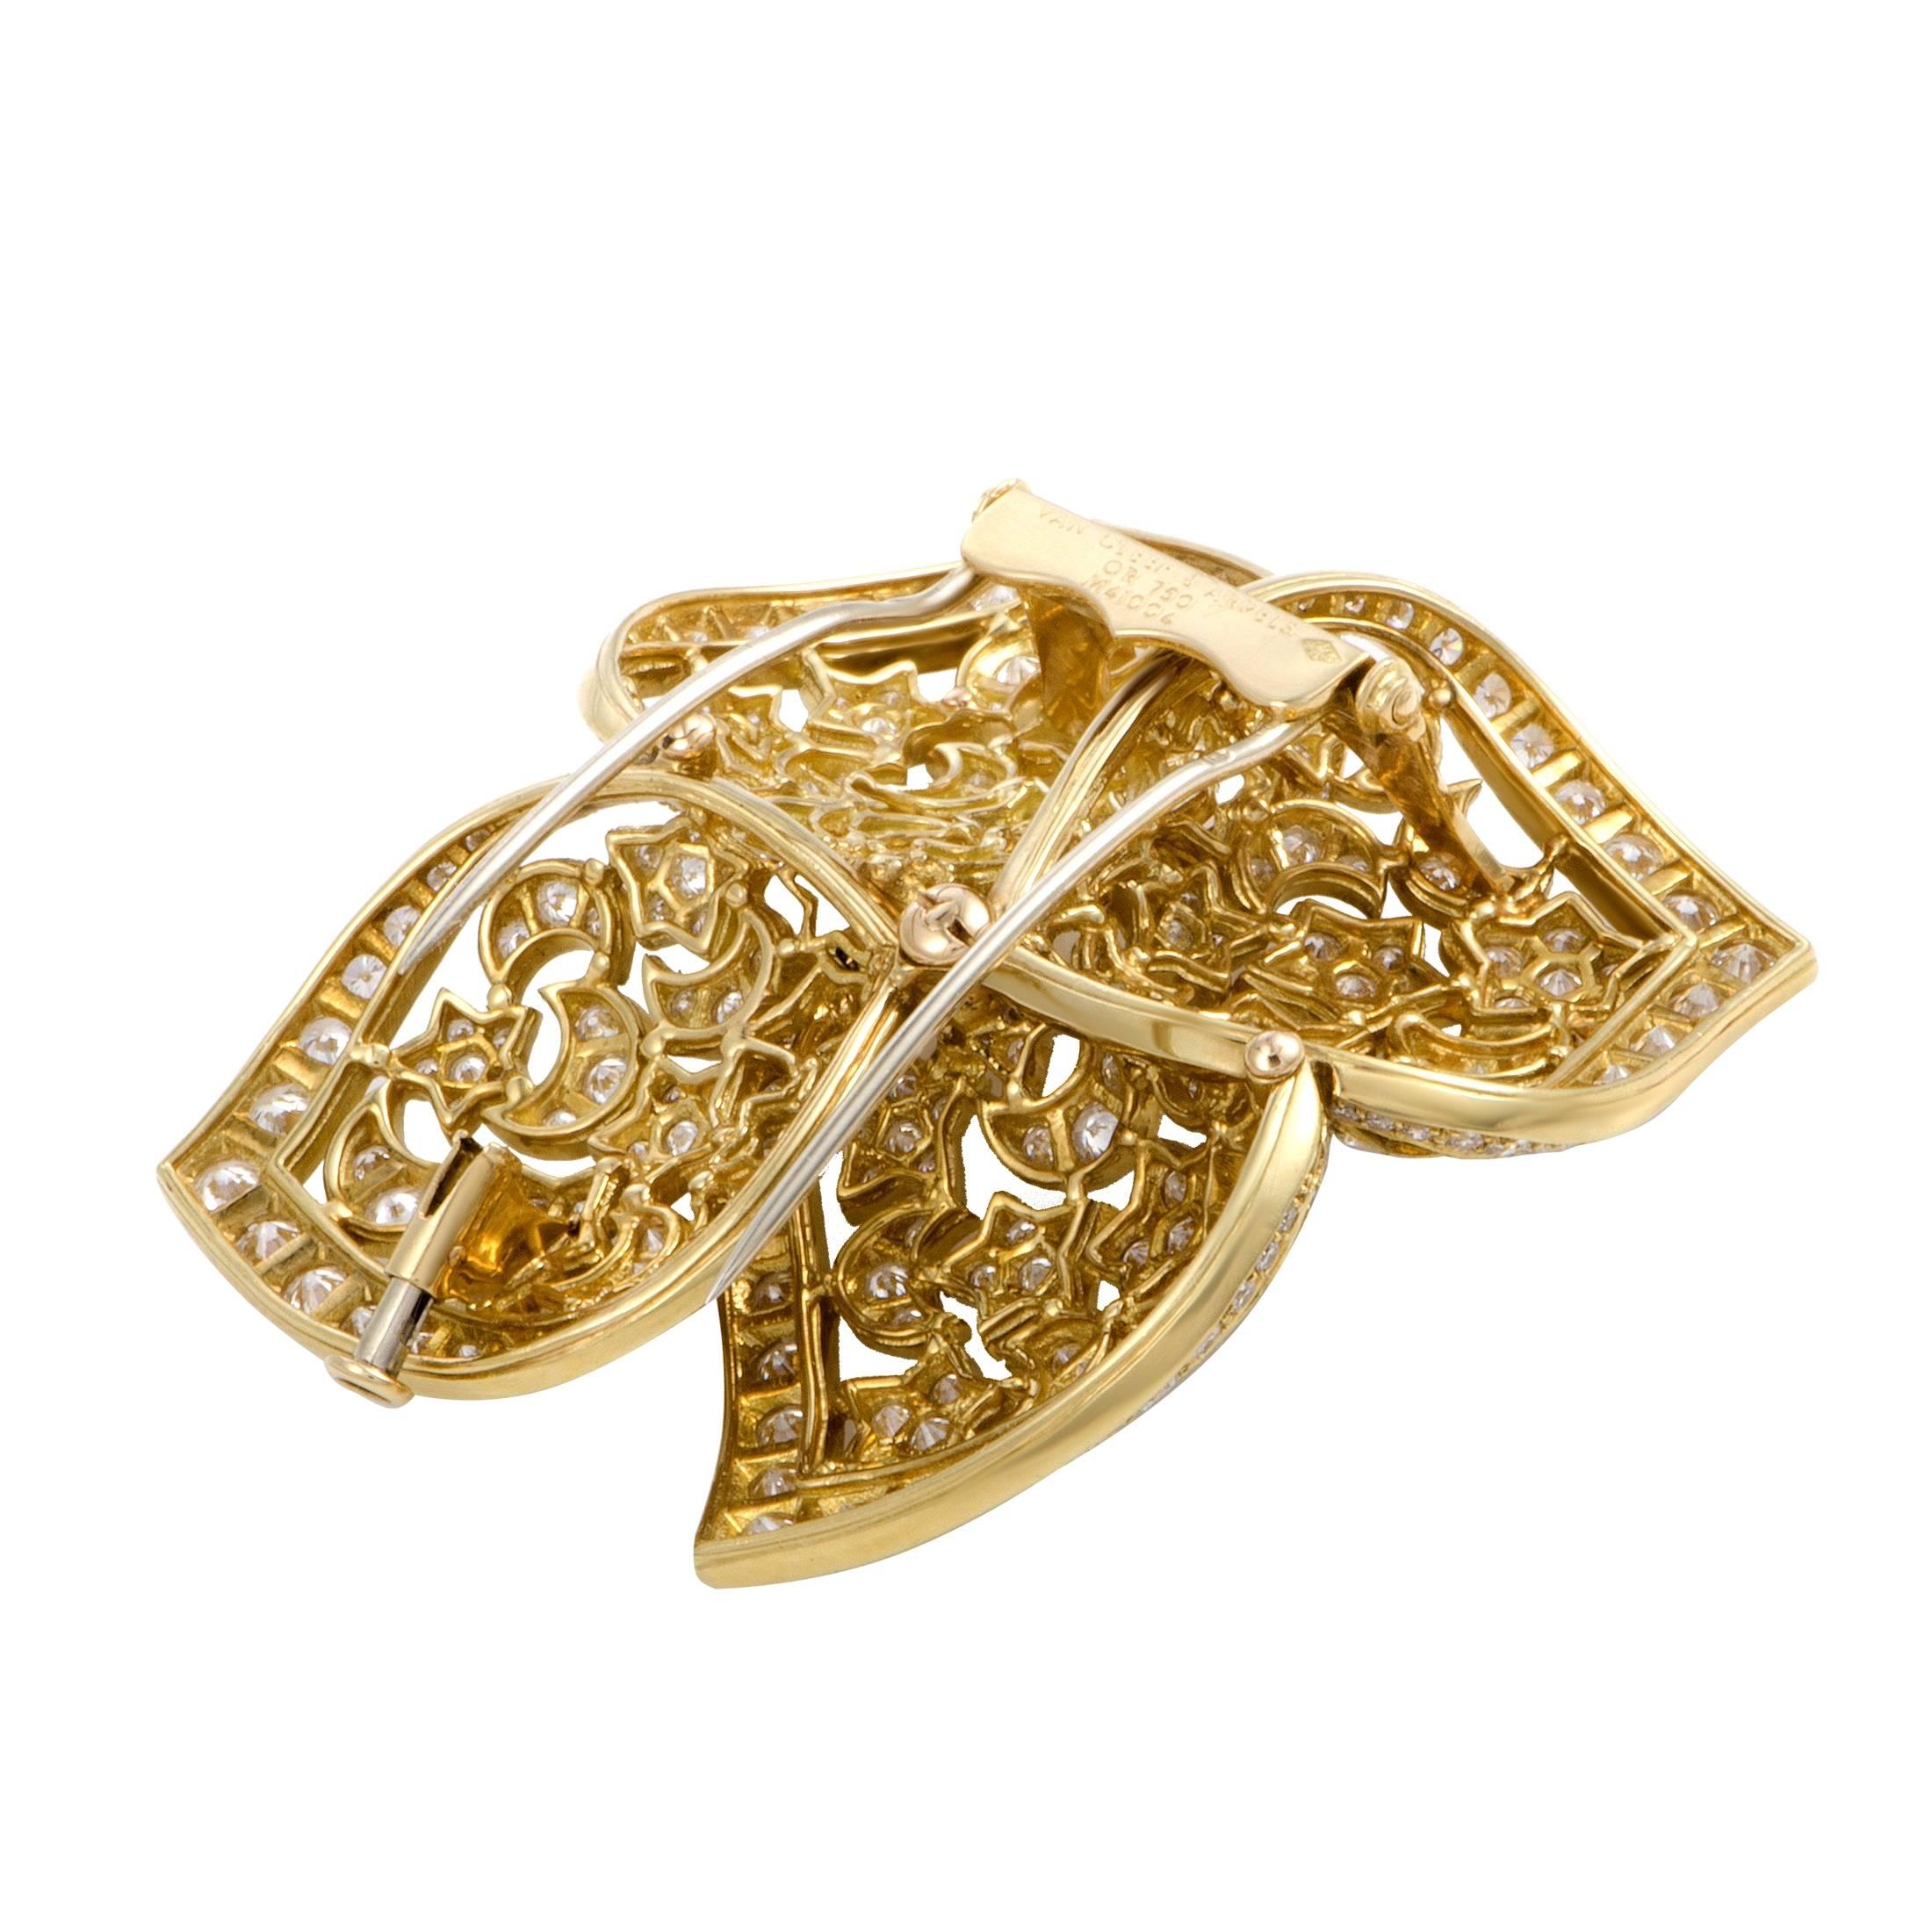 Elegantly designed by Van Cleef & Arpels in shimmering 18K yellow gold, this stunning pin is absolutely exemplary in design and style. The sparkling brooch is completely embellished in dazzling 8.50ct of E-color VVS-clarity diamonds that radiate the